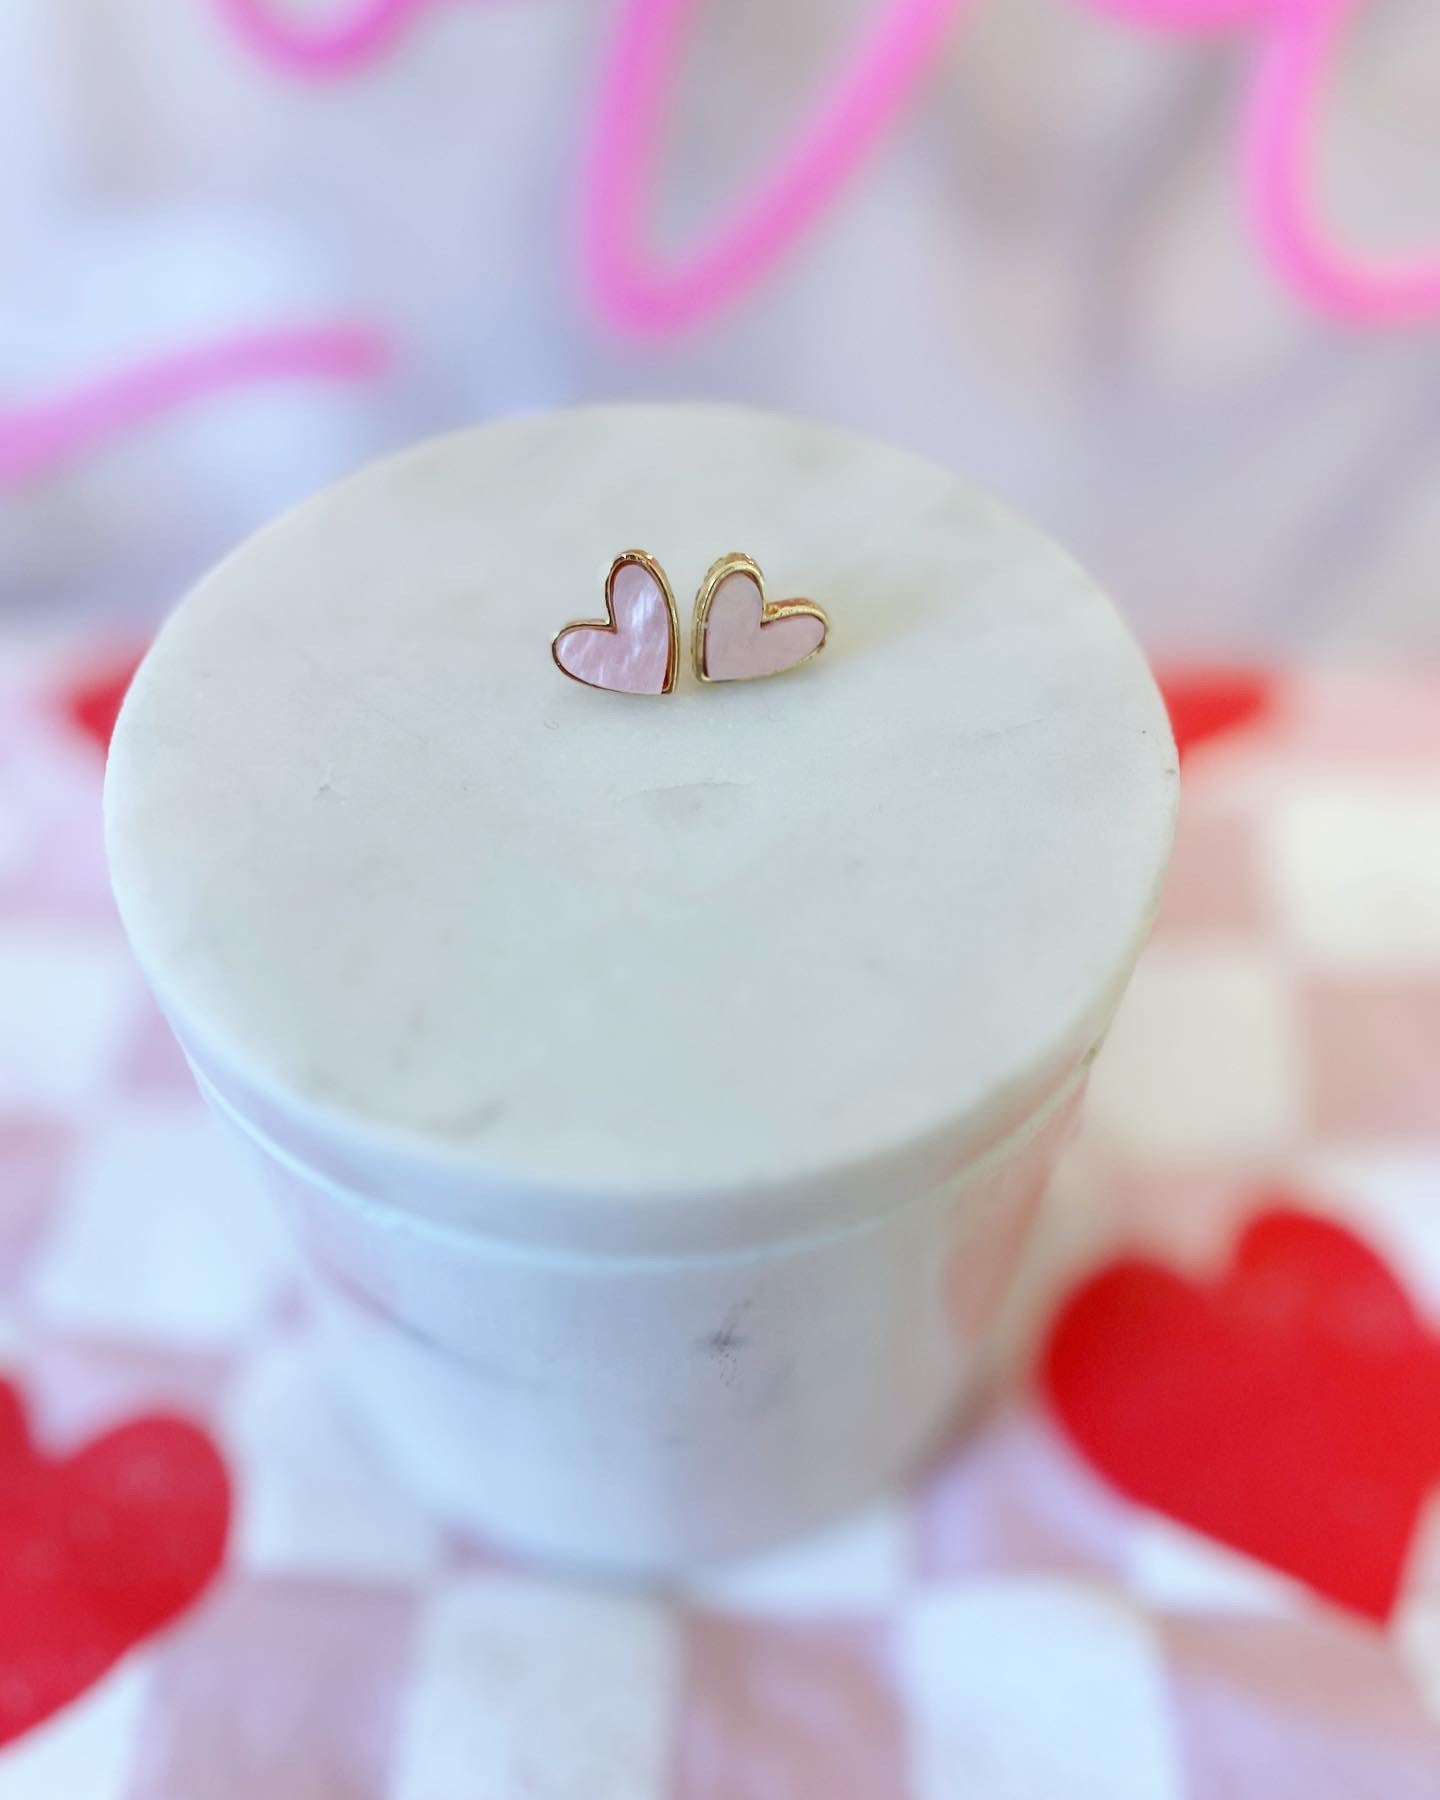 Teacher Valentine's Day Gift!Pink & Gold Heart Stud earrings, Valentine's gift, included with box+ribbon! Happy Valentine's Day!Teacher gift